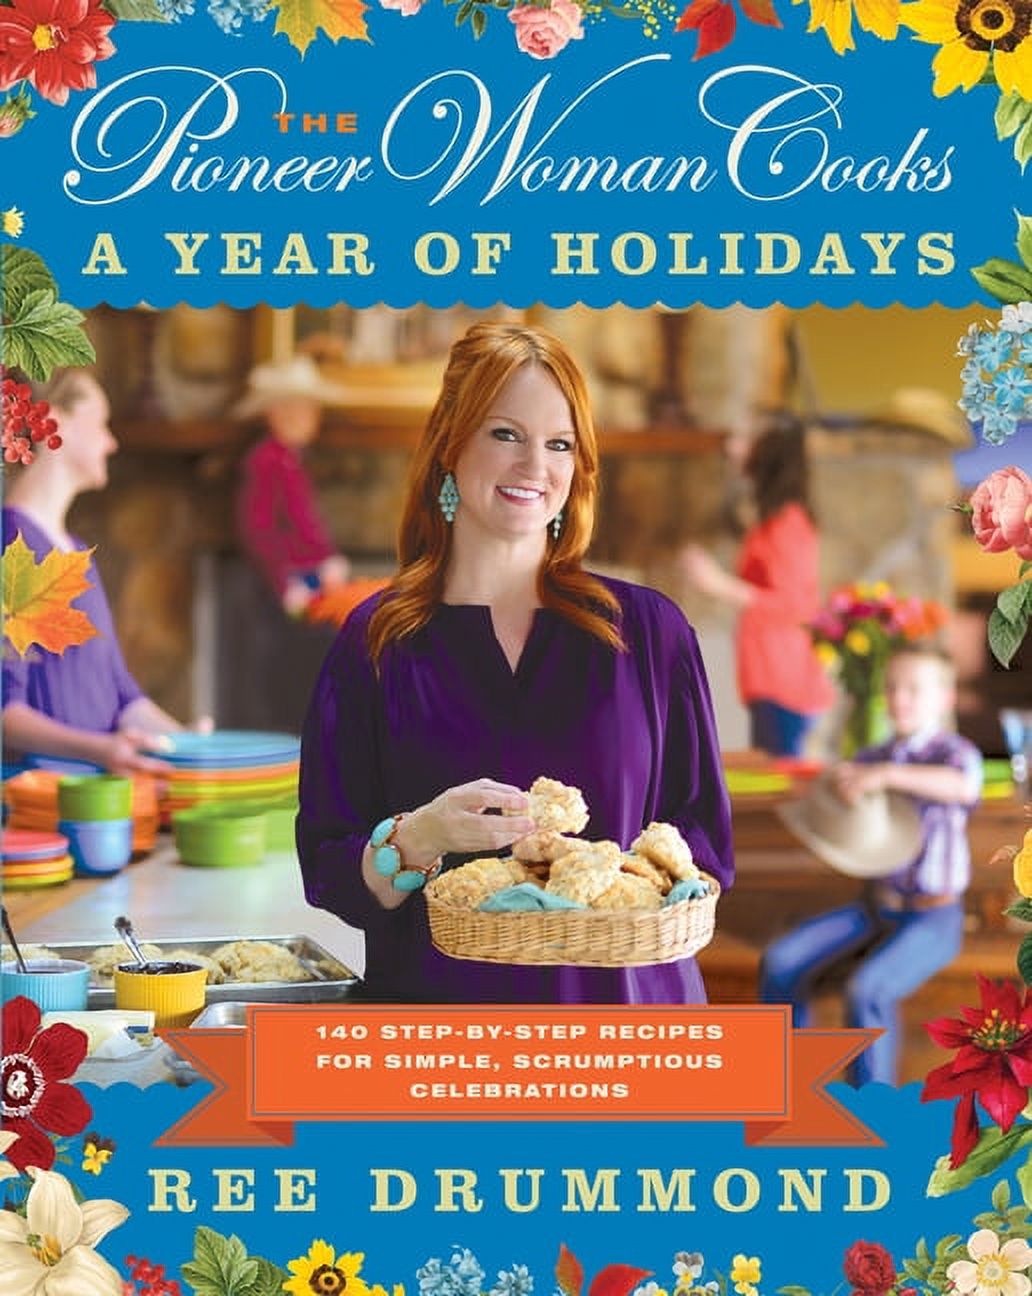 The Pioneer Woman Cooks: A Year of Holidays - image 1 of 1